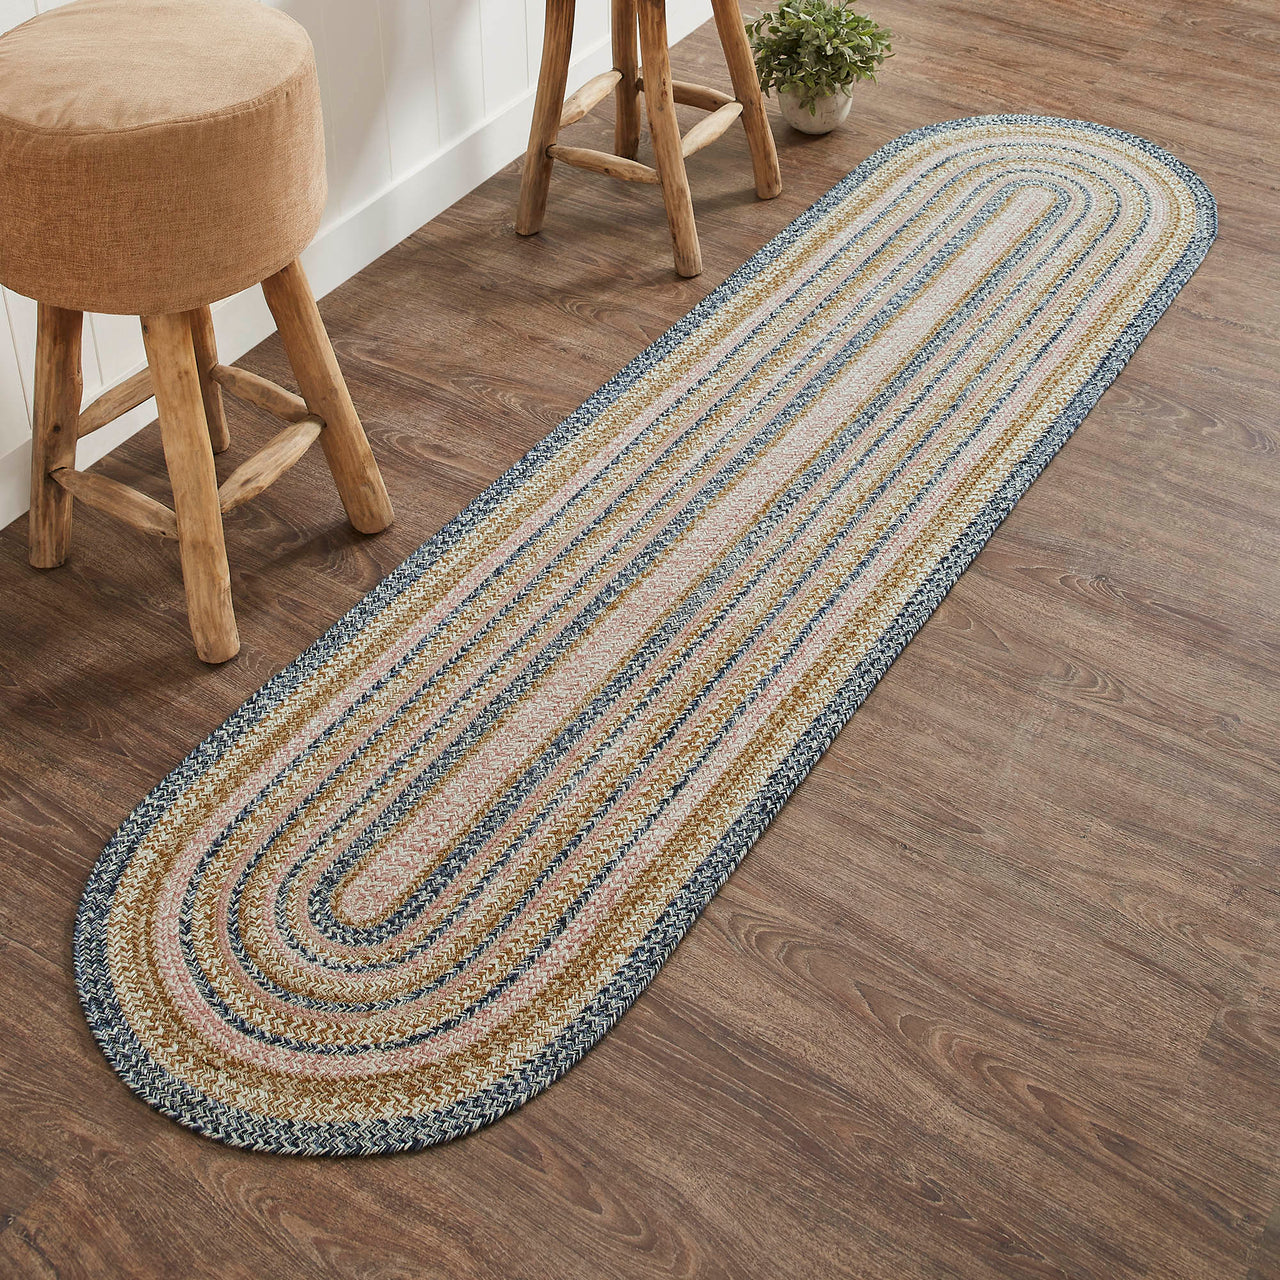 Kaila Jute Braided Runner Rug Oval with Rug Pad 24"x96" (2'x8') VHC Brands